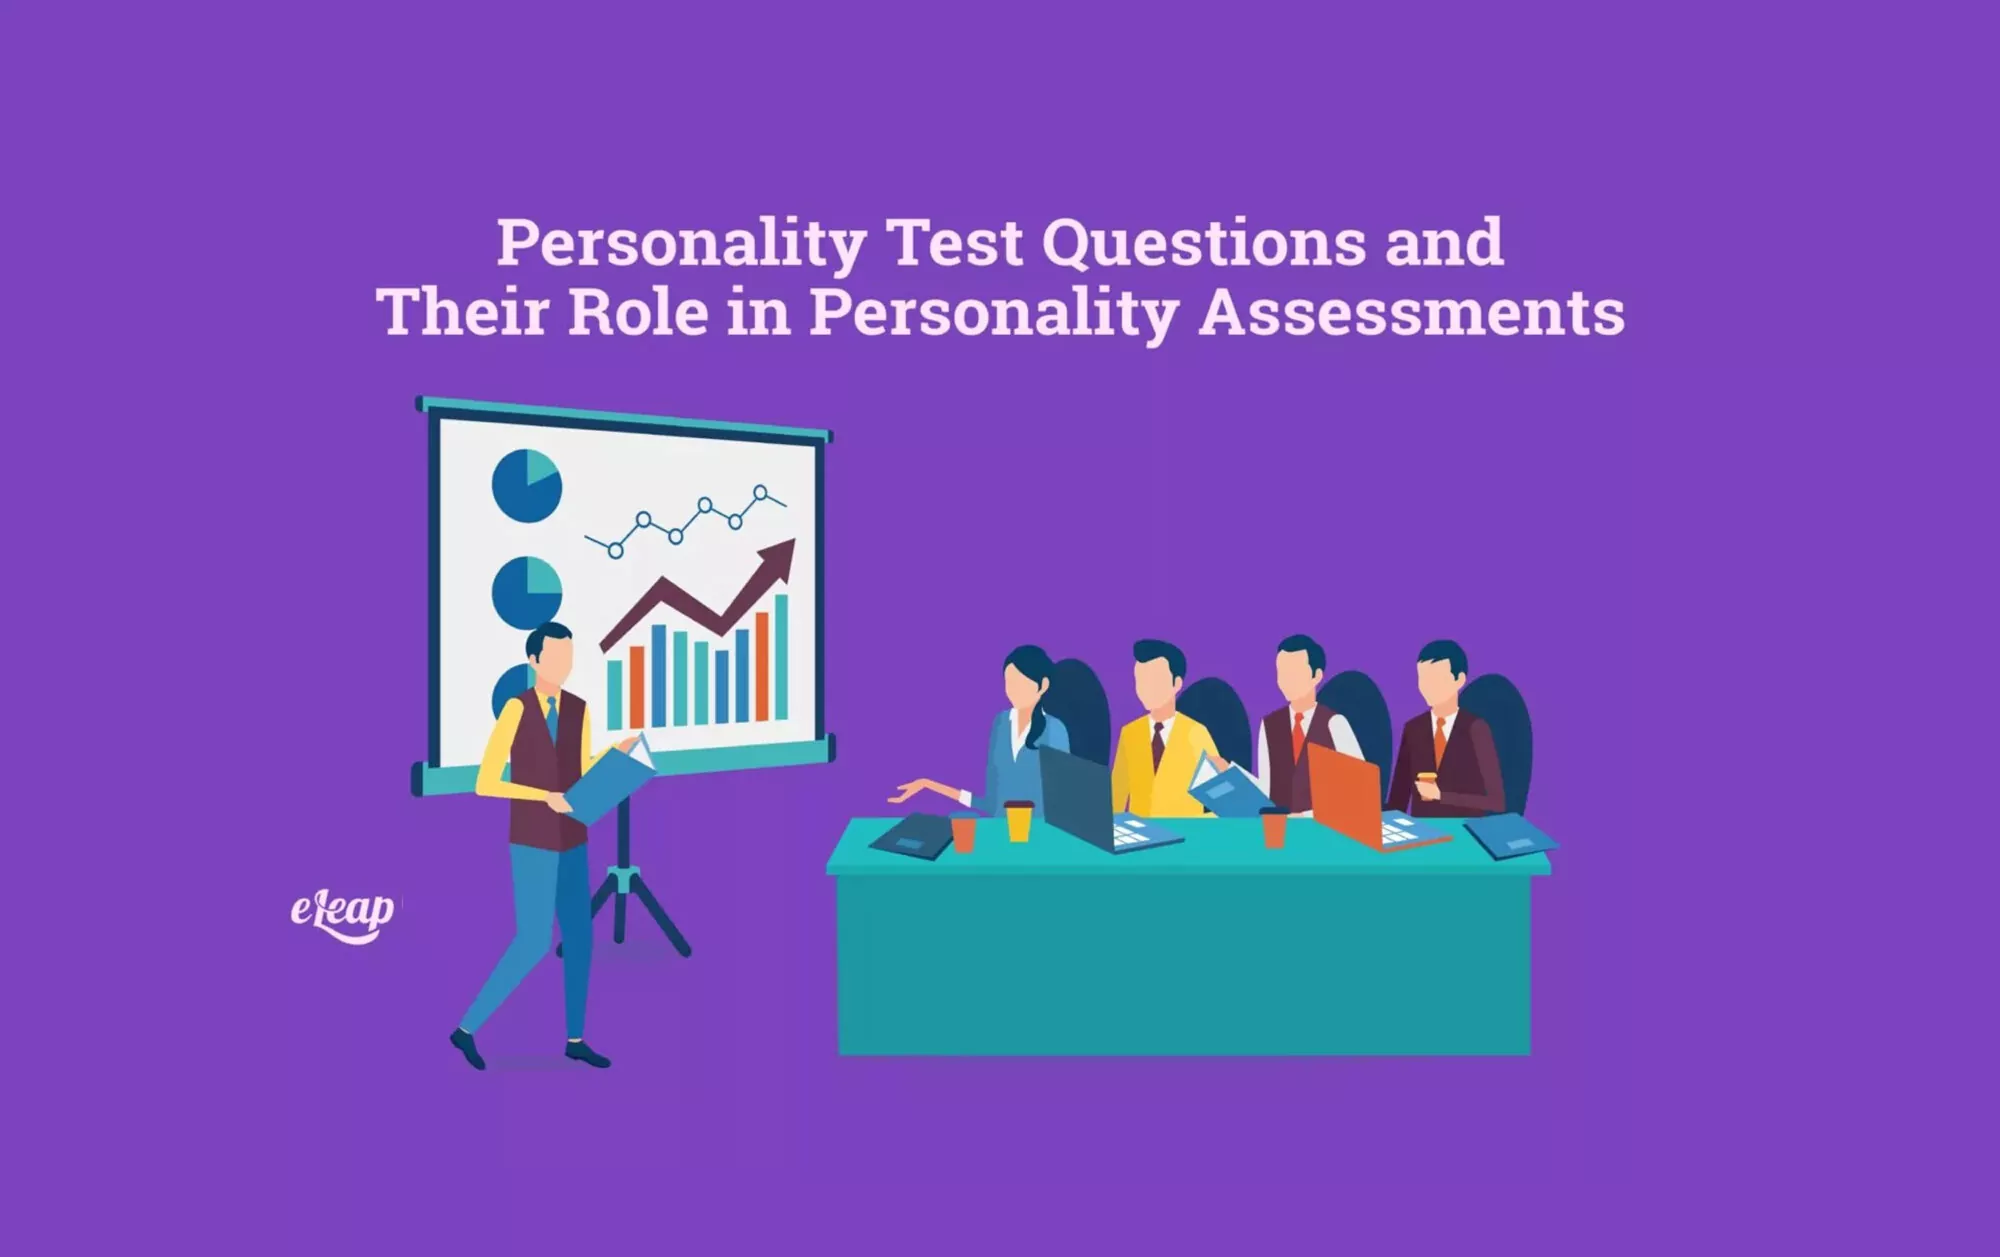 Personality Test Questions and Their Role in Personality Assessments